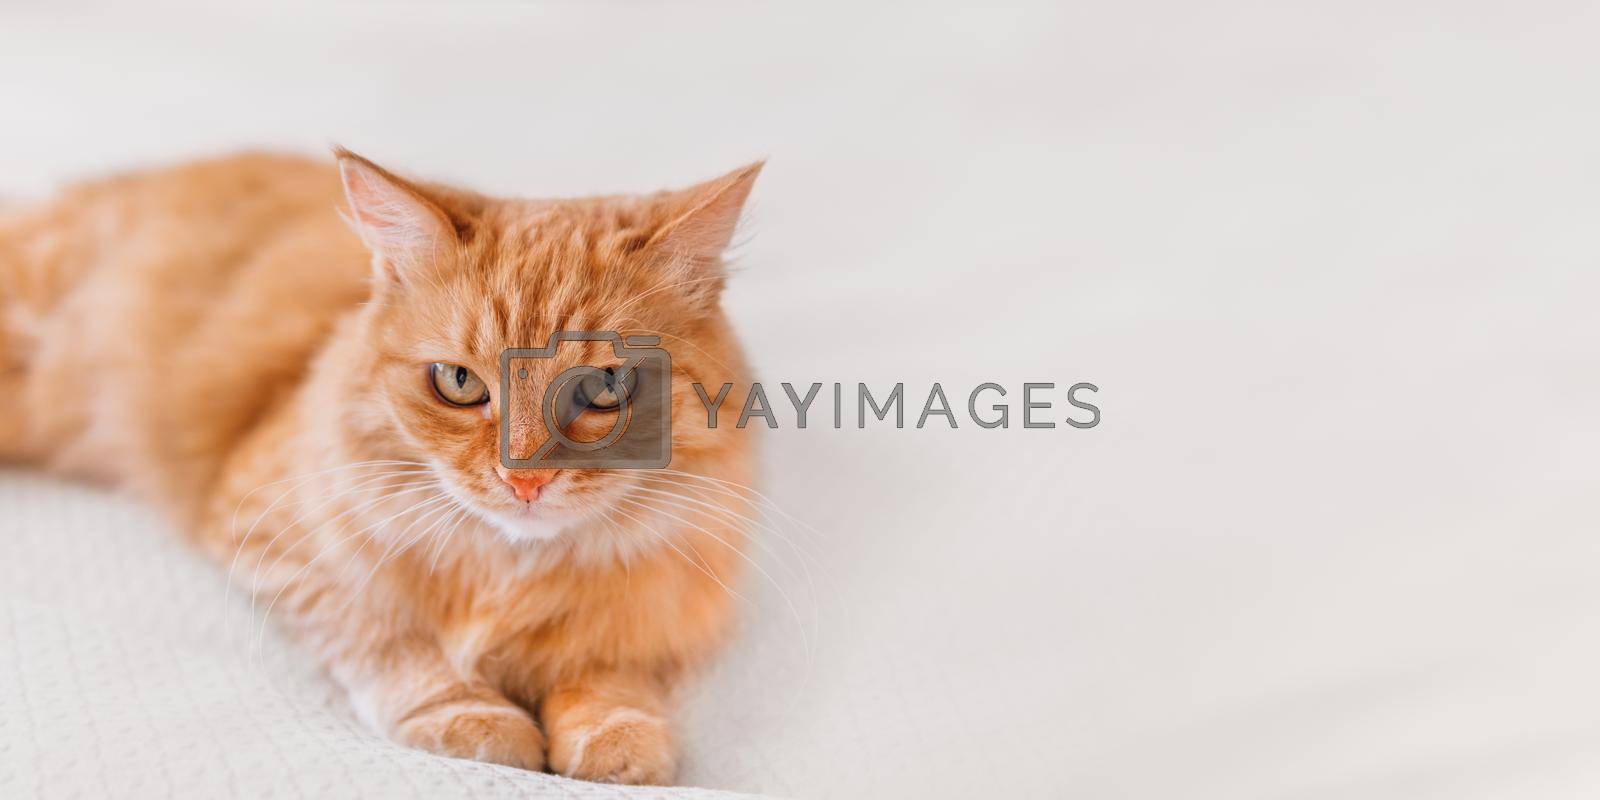 Royalty free image of Cute ginger cat on white textile background. Attentive looking domestic animal. Fluffy pet. Background with copy space. by aksenovko